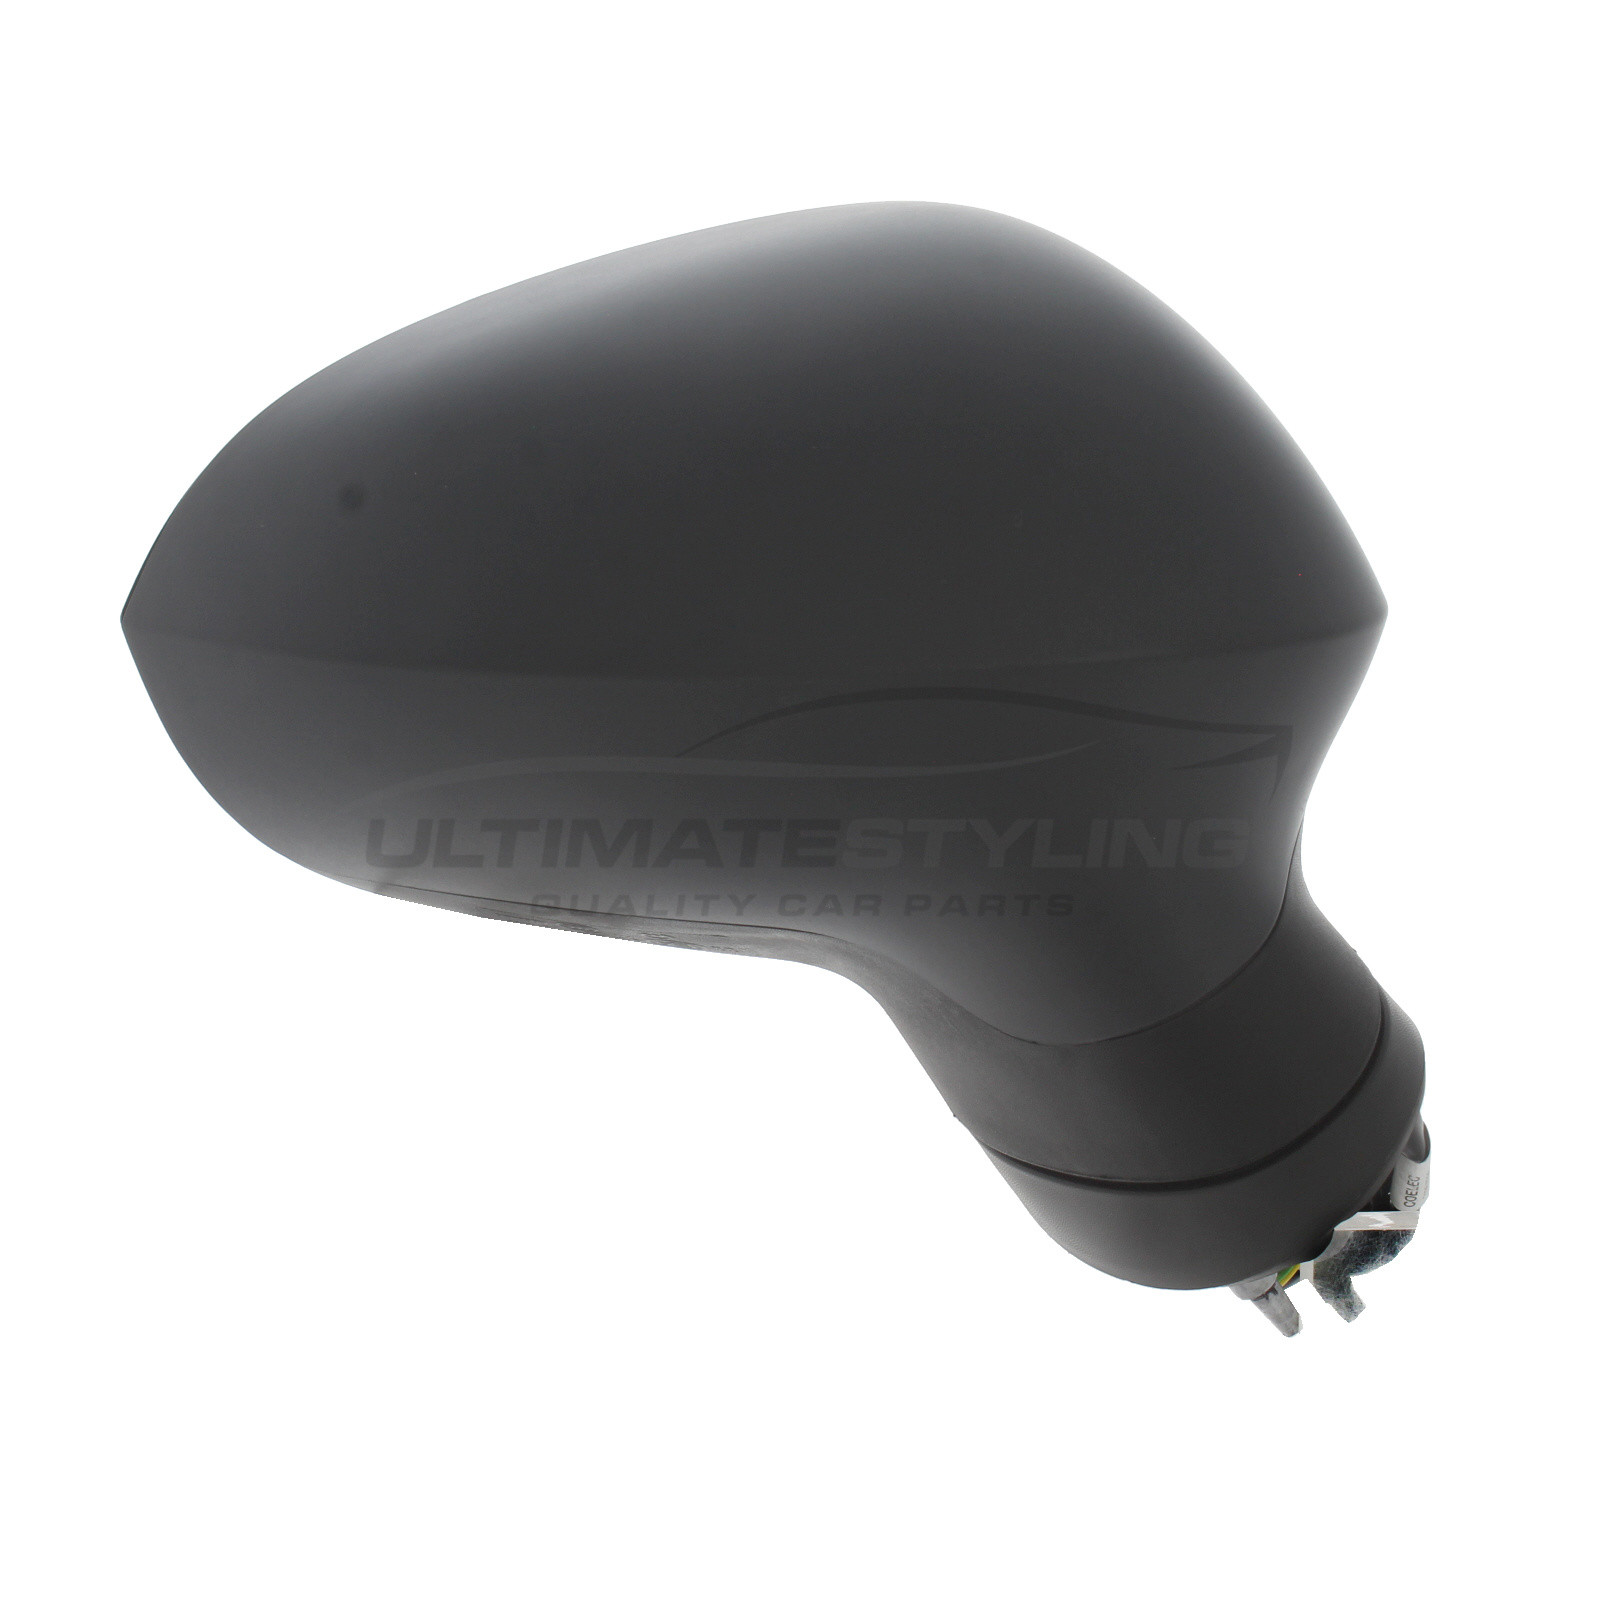 Seat Leon Wing Mirror / Door Mirror - Drivers Side (RH) - Electric adjustment - Heated Glass - Paintable - Black